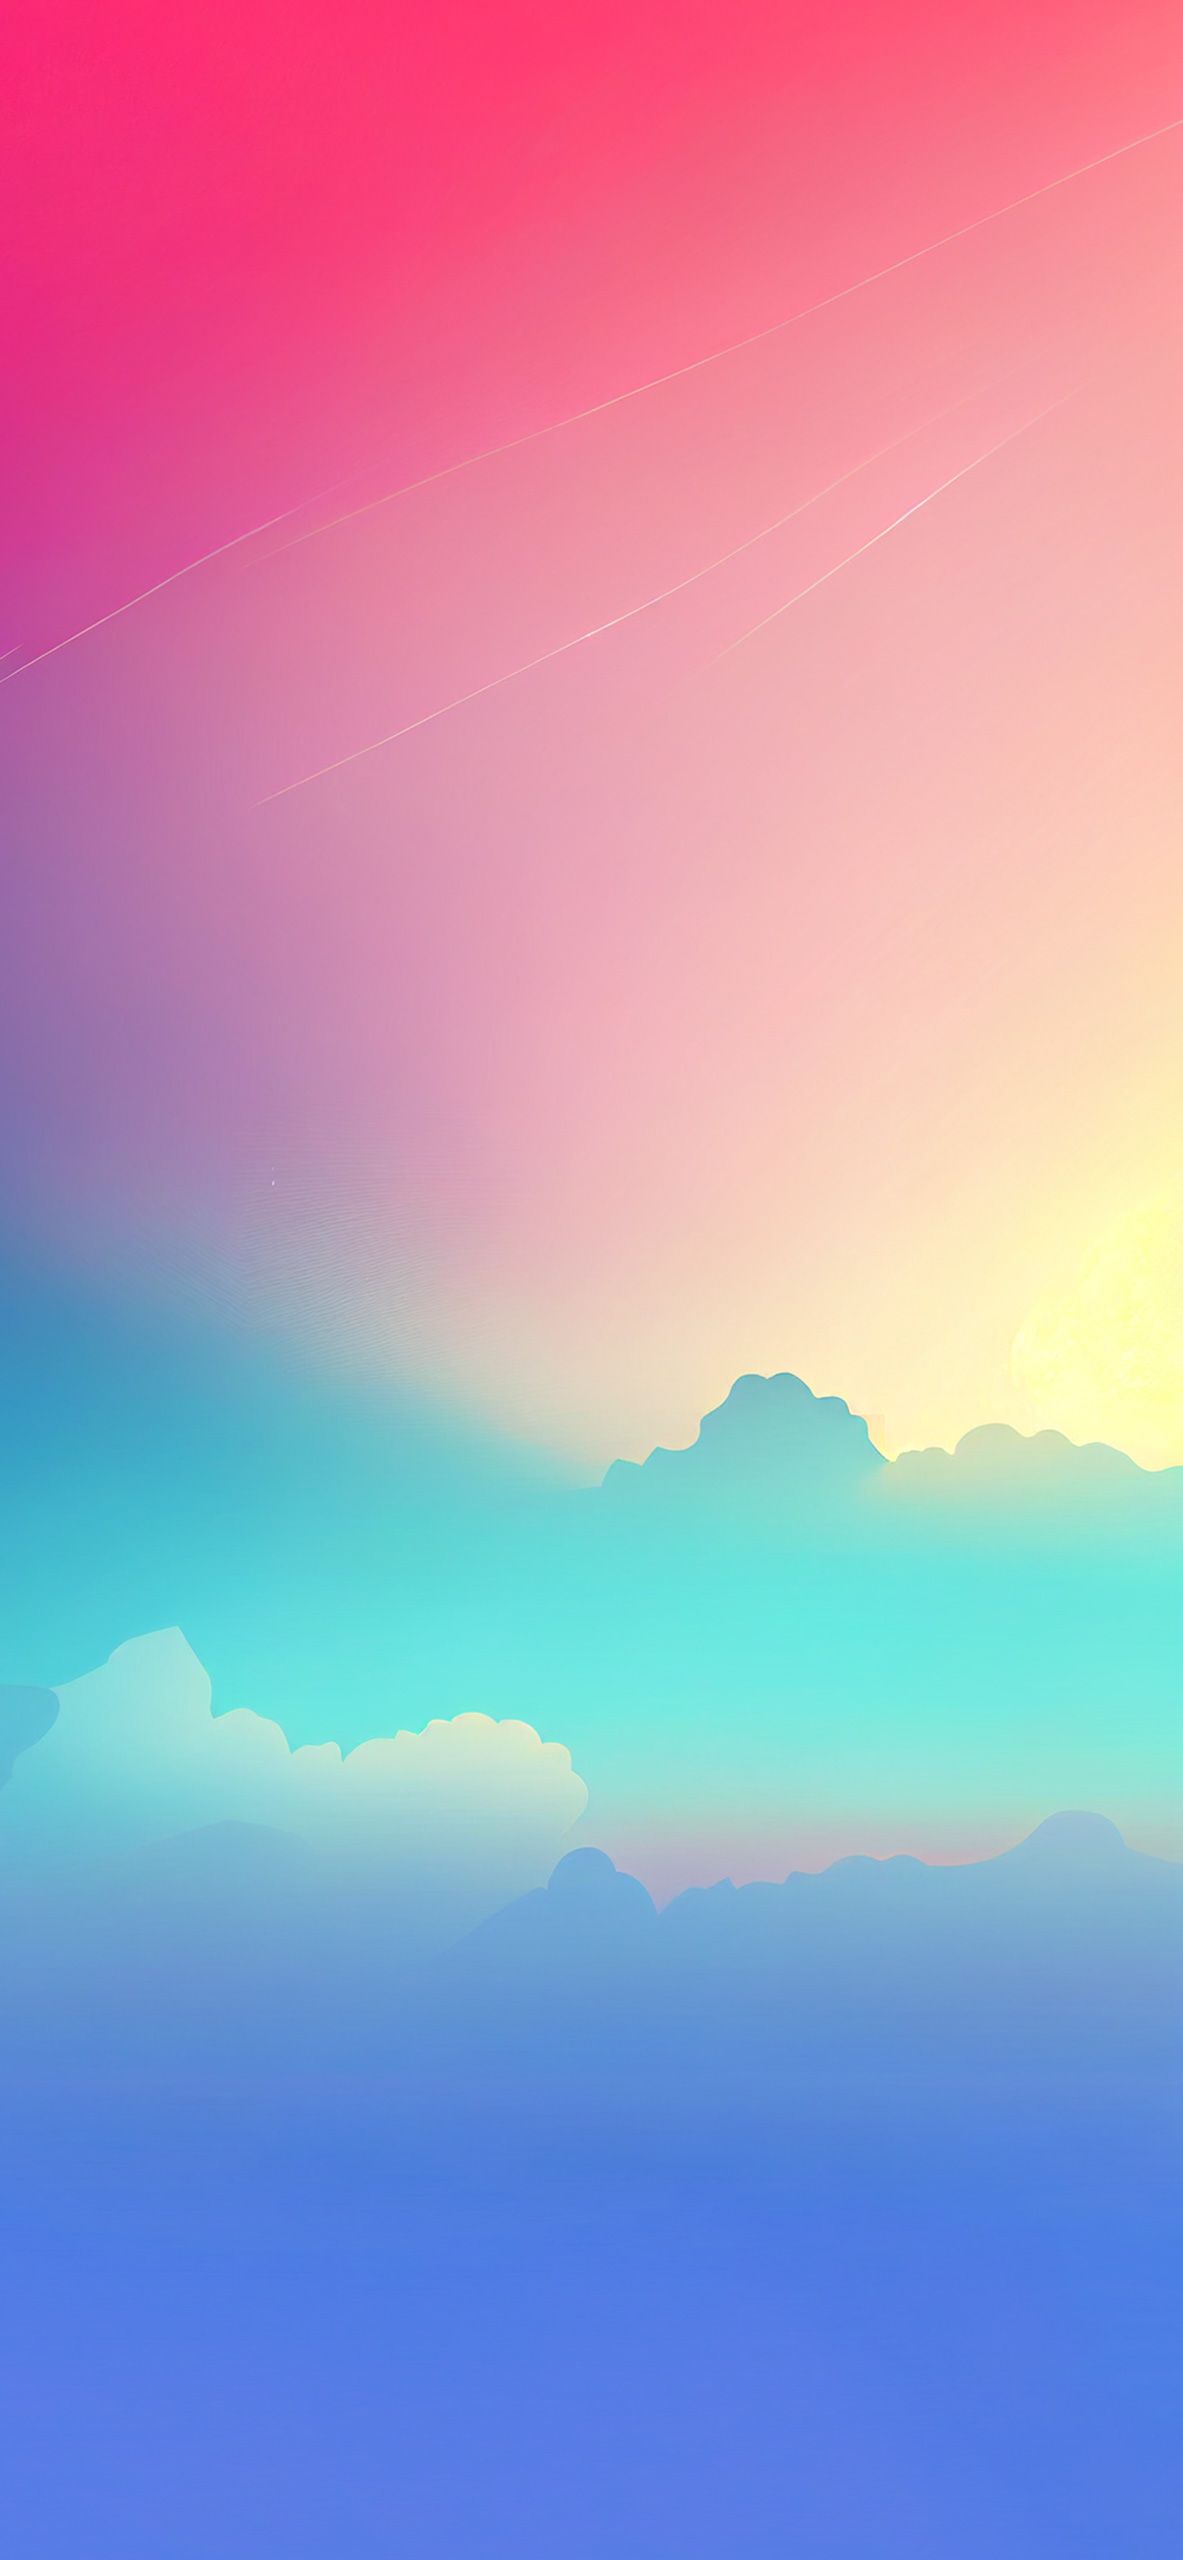 Download the following 1080x1920 Sky Wallpapers 1080x1920 for free in high resolution and use it as desktop wallpaper, phone wallpaper, tablet wallpaper, or any other device - Gradient